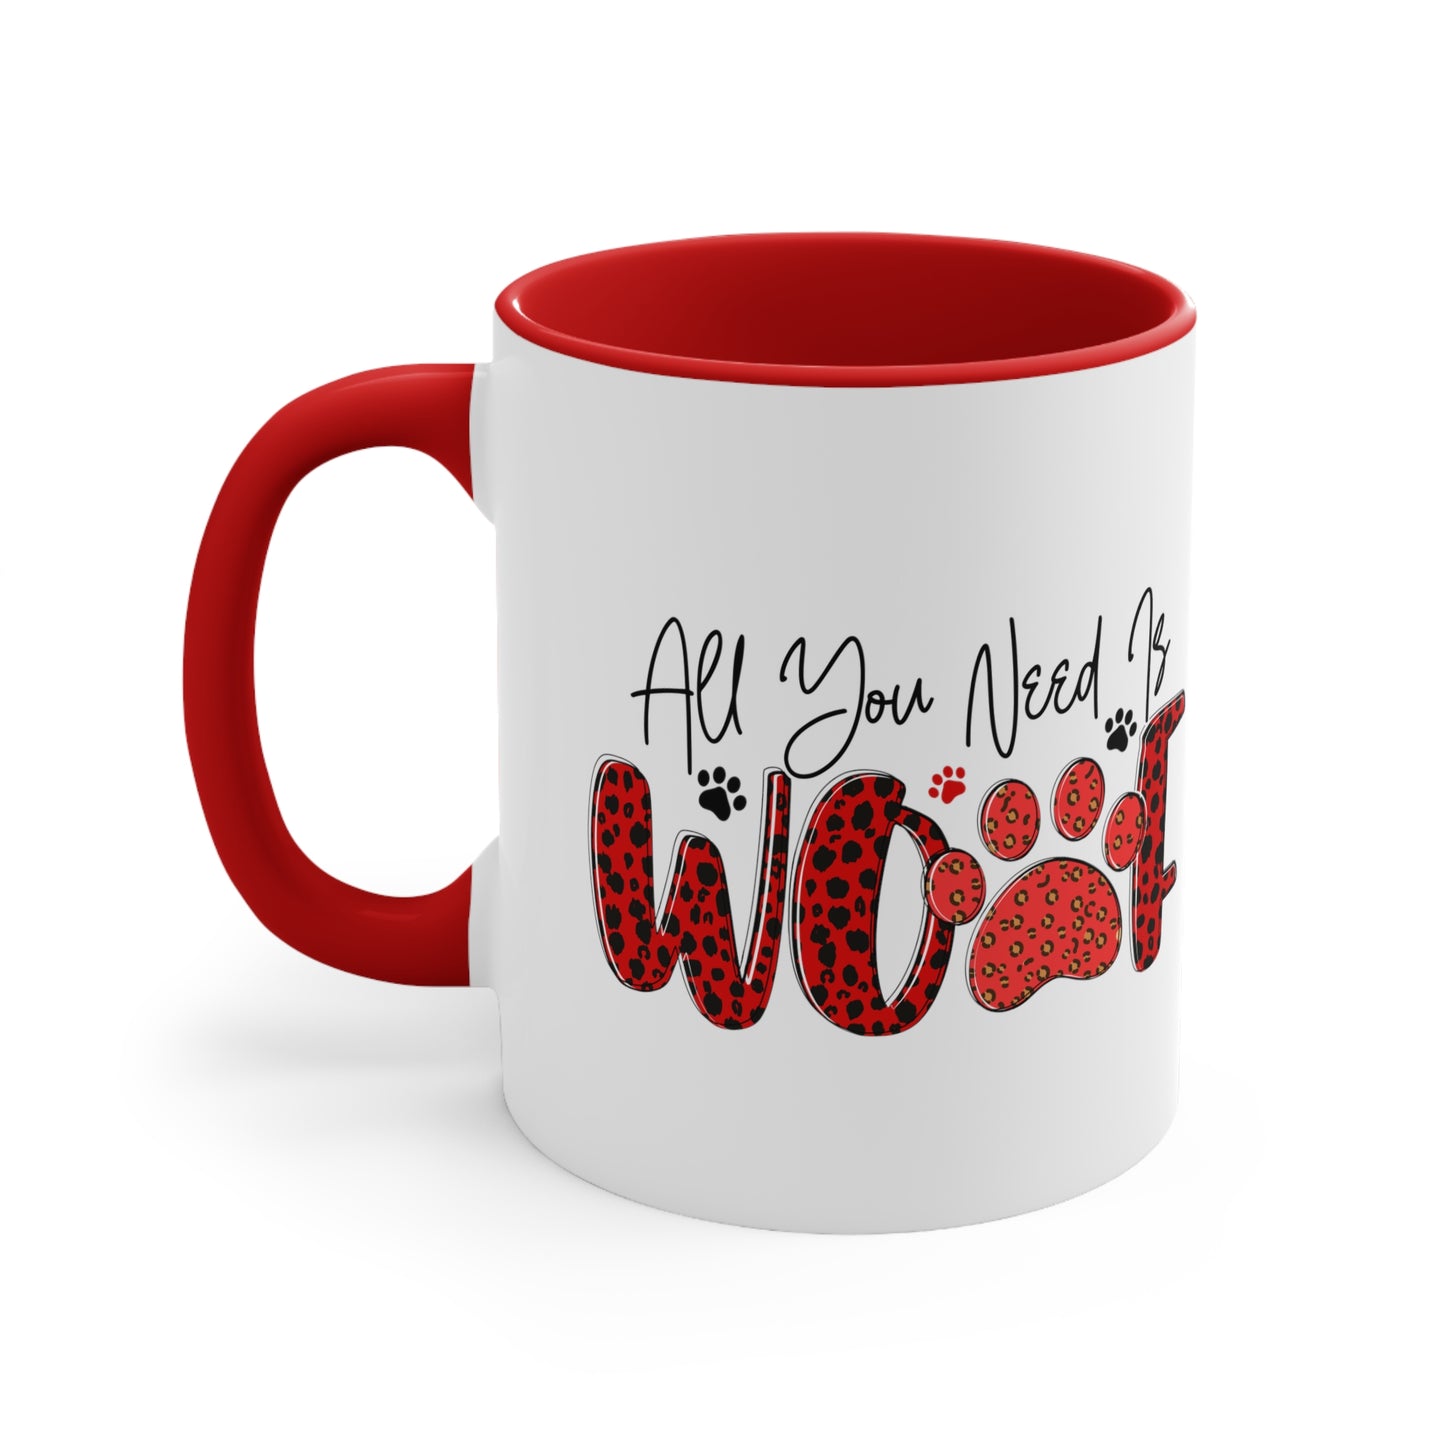 All You Need is Woof Valentines Day Accent Coffee Mug, 11oz